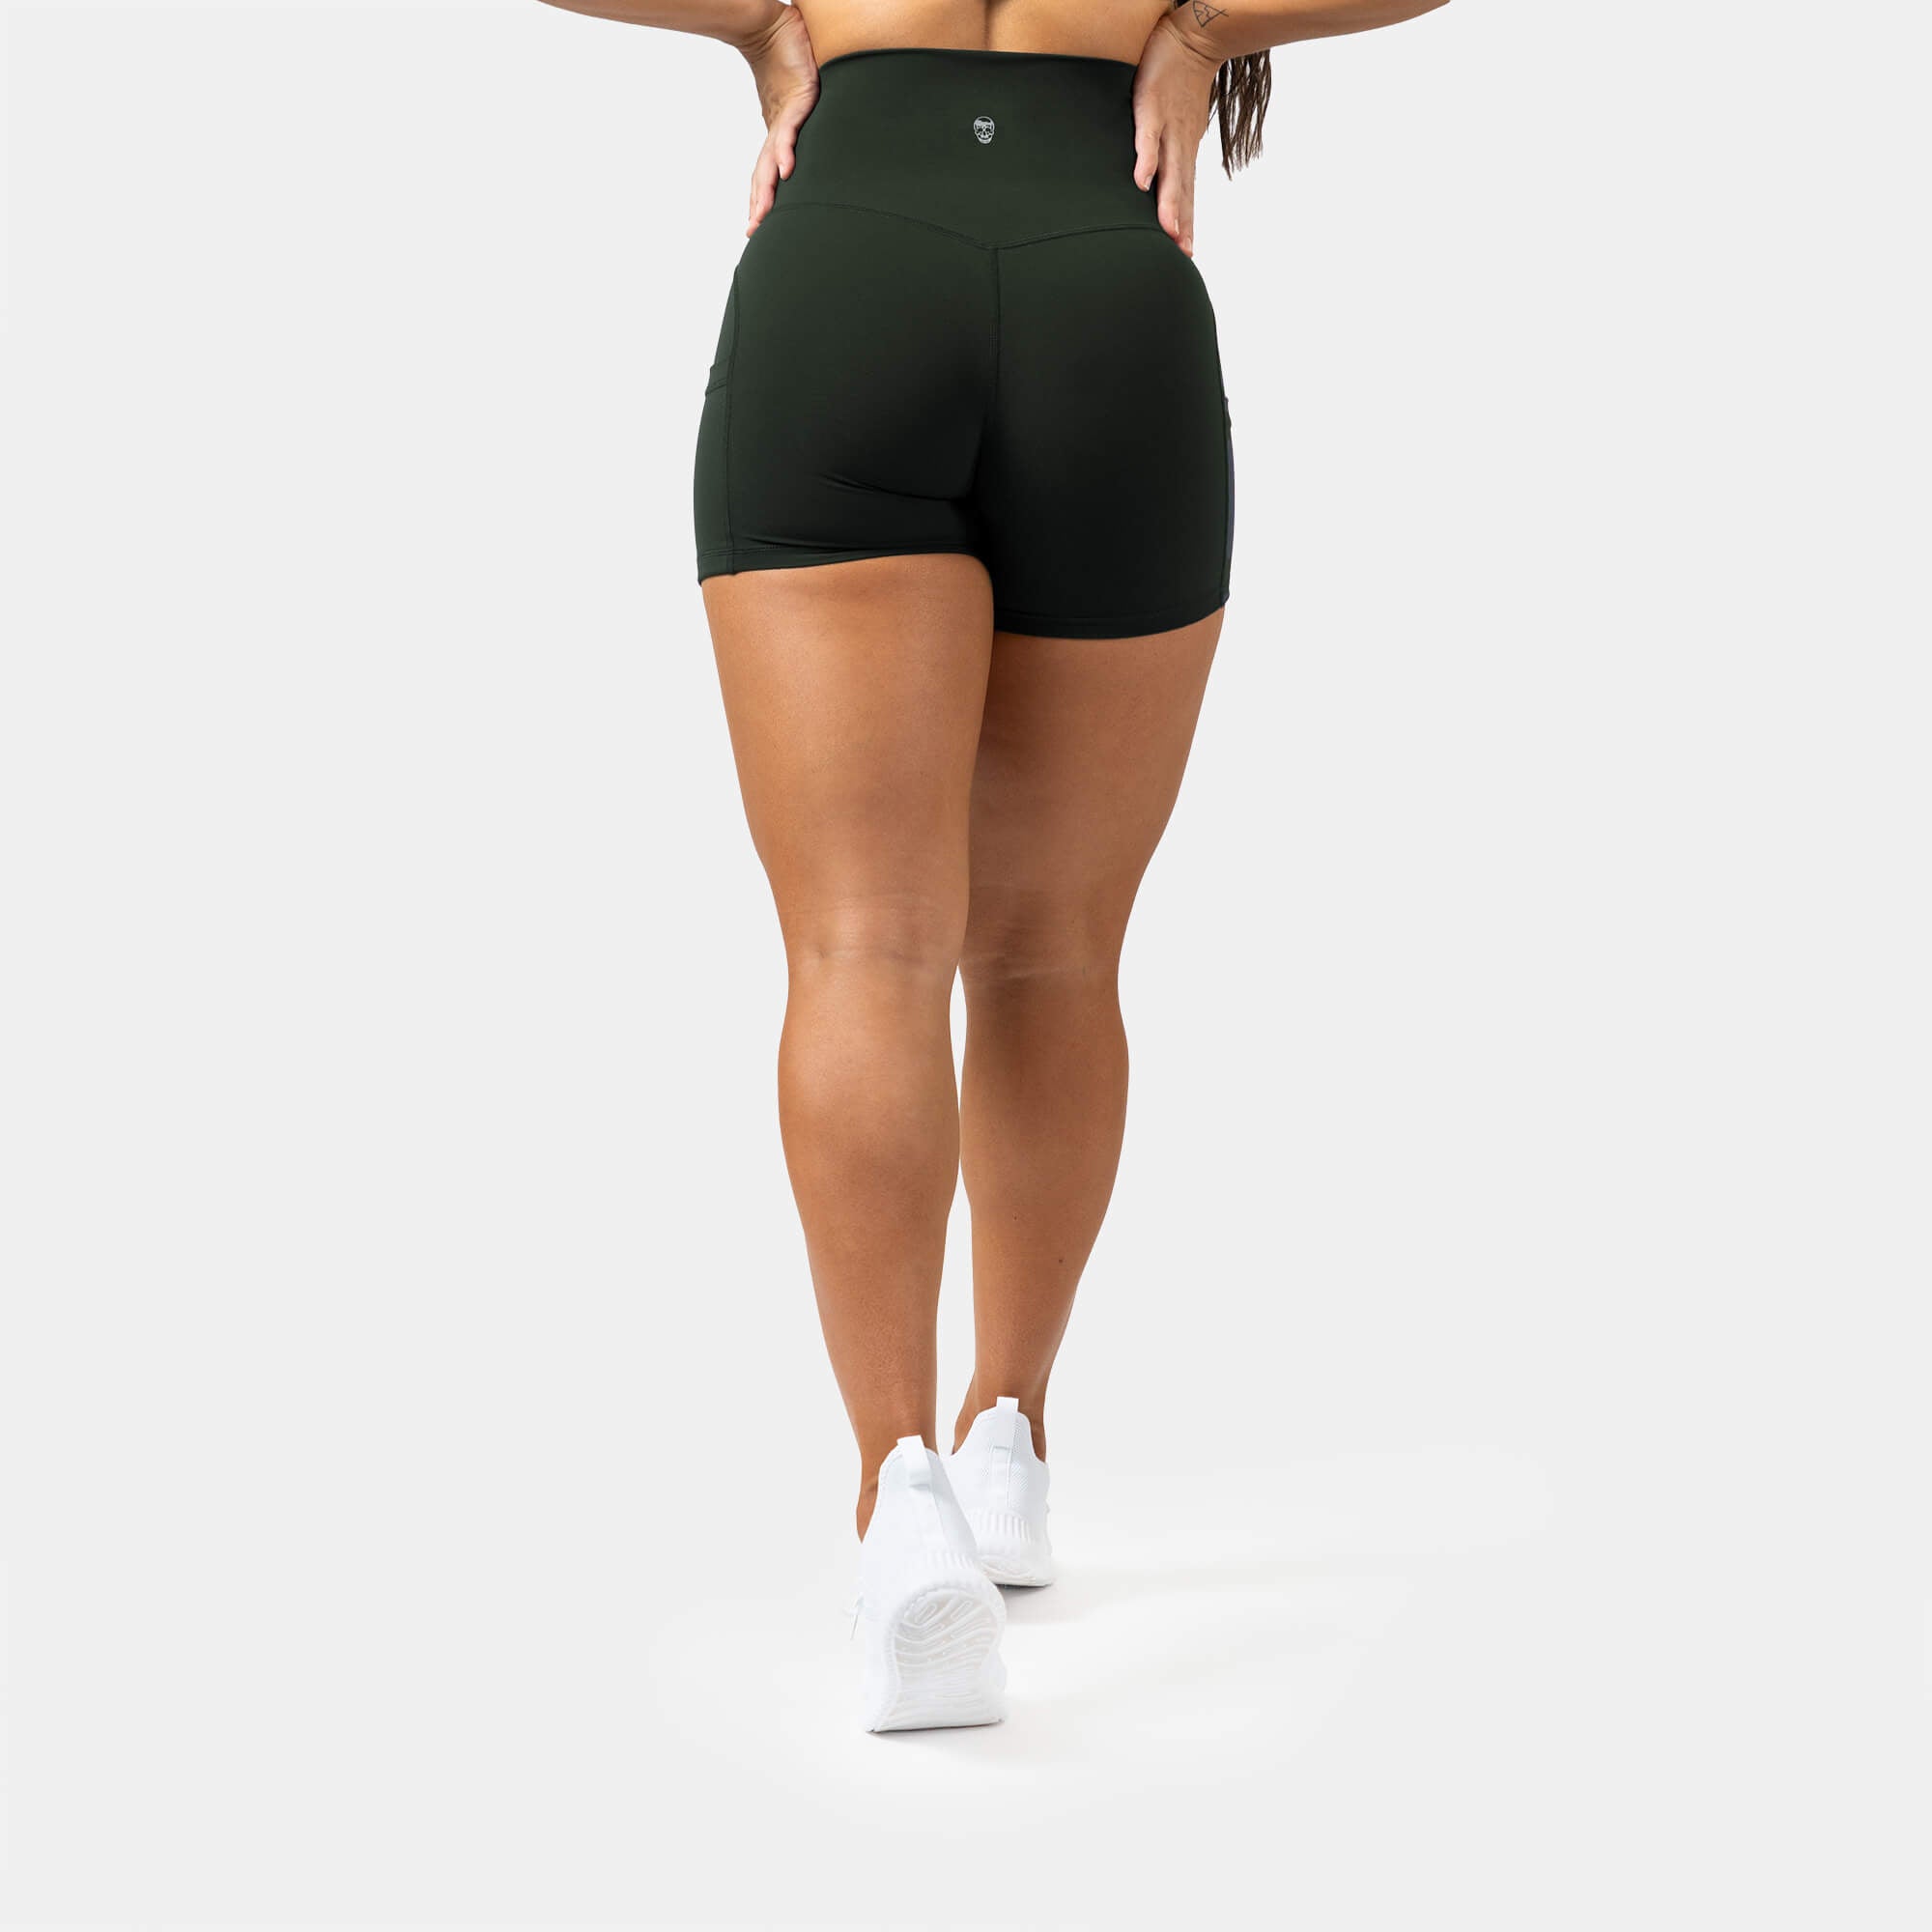 Define Shorts - Womens booty shorts - Almond – Strong Liftwear